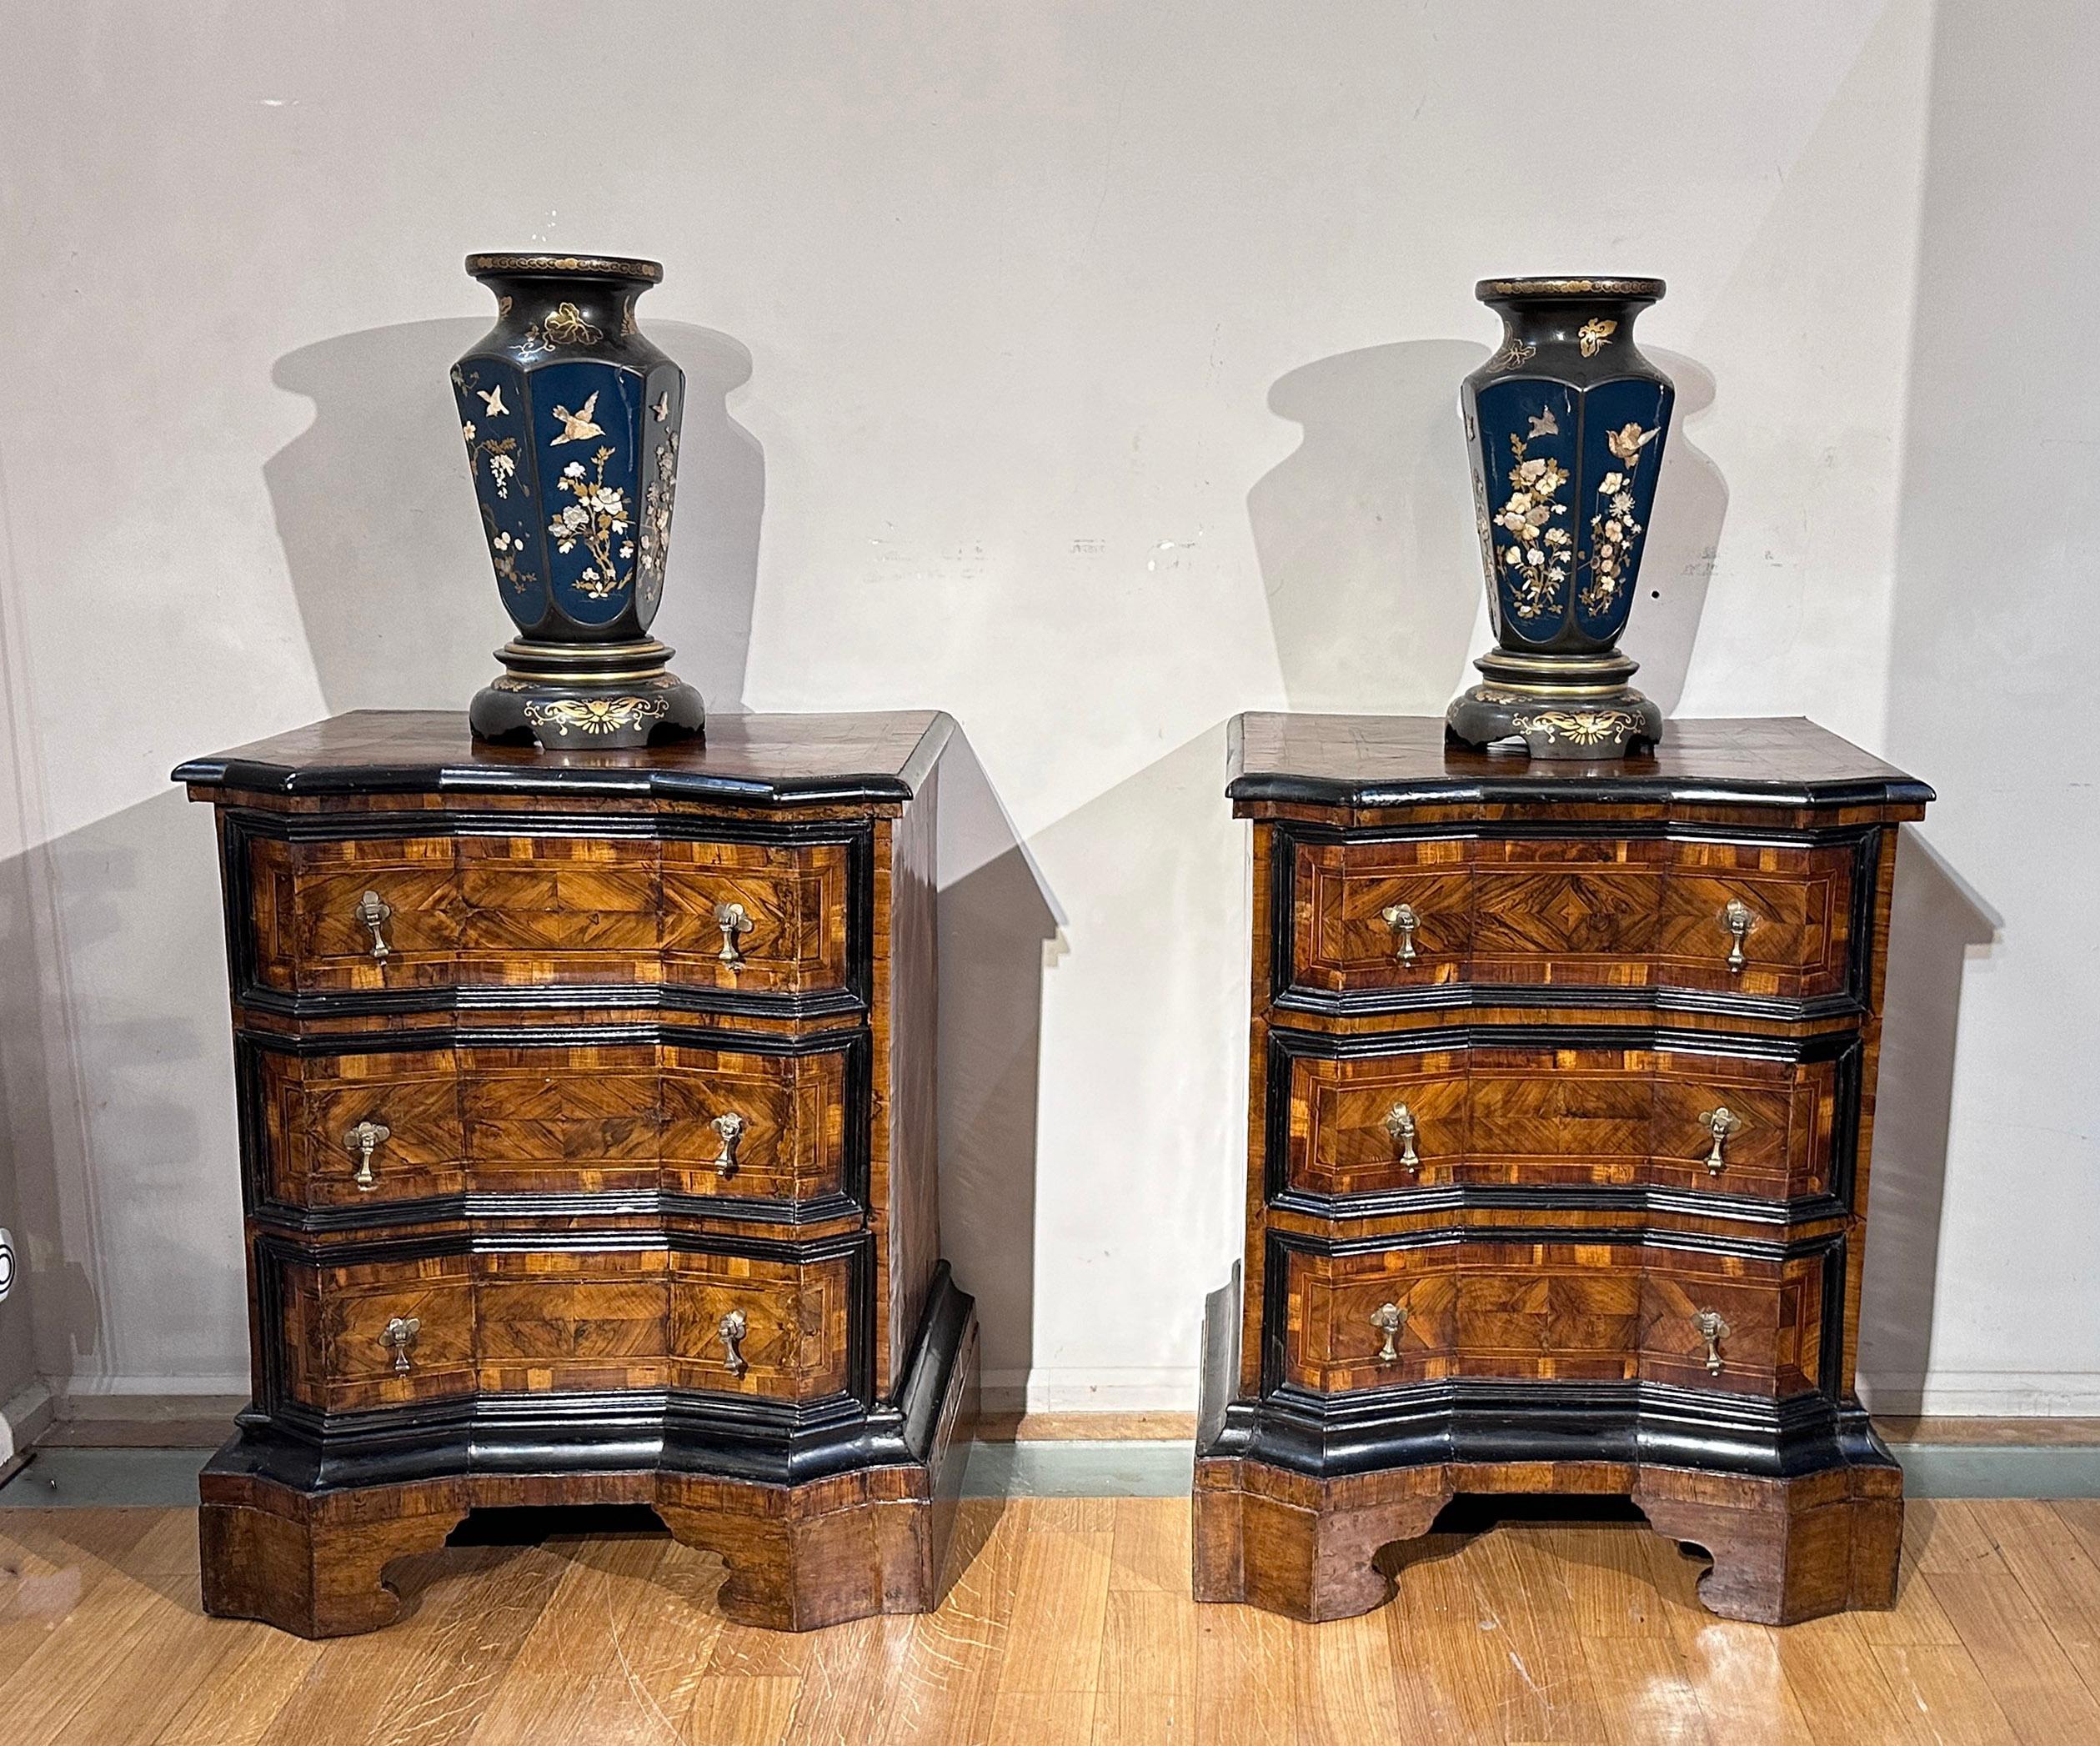 EARLY 18th CENTURY PAIR OF CHESTS LOUIS XIV  2